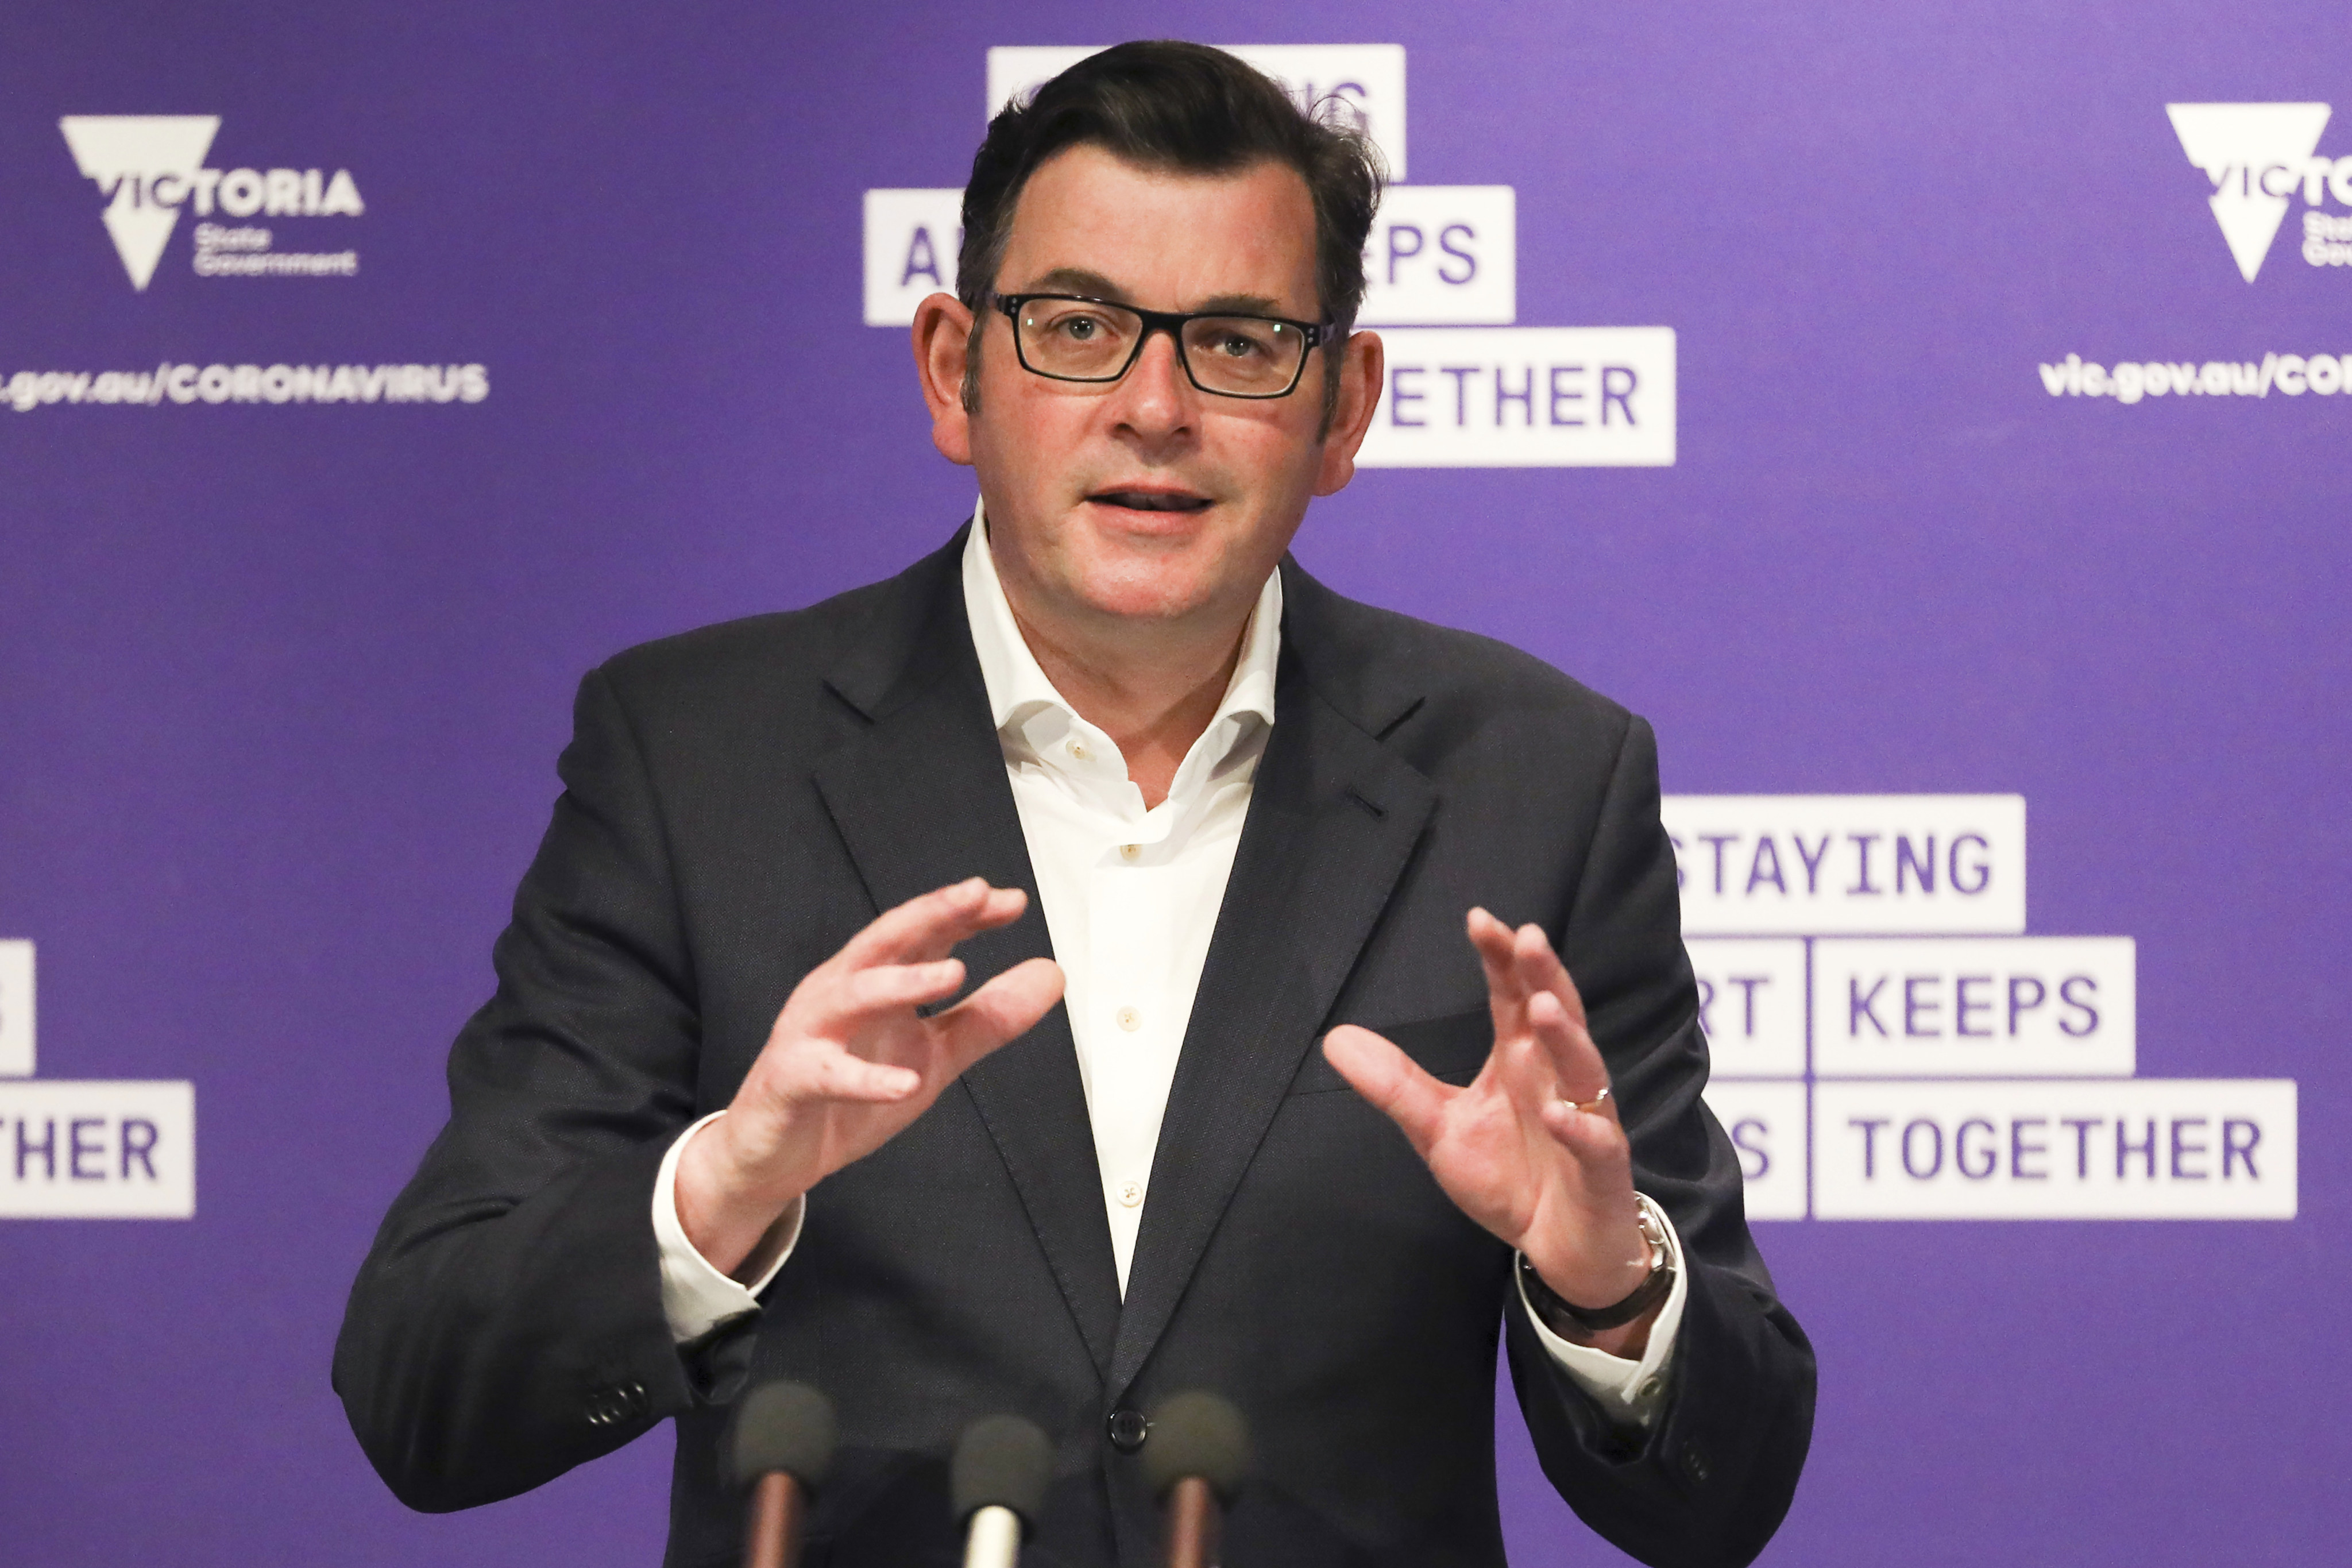 The auditor’s report said then-premier Dan Andrews overstated the cost of hosting the Commonwealth Games when he announced Victoria’s withdrawal last July. Photo: AP 